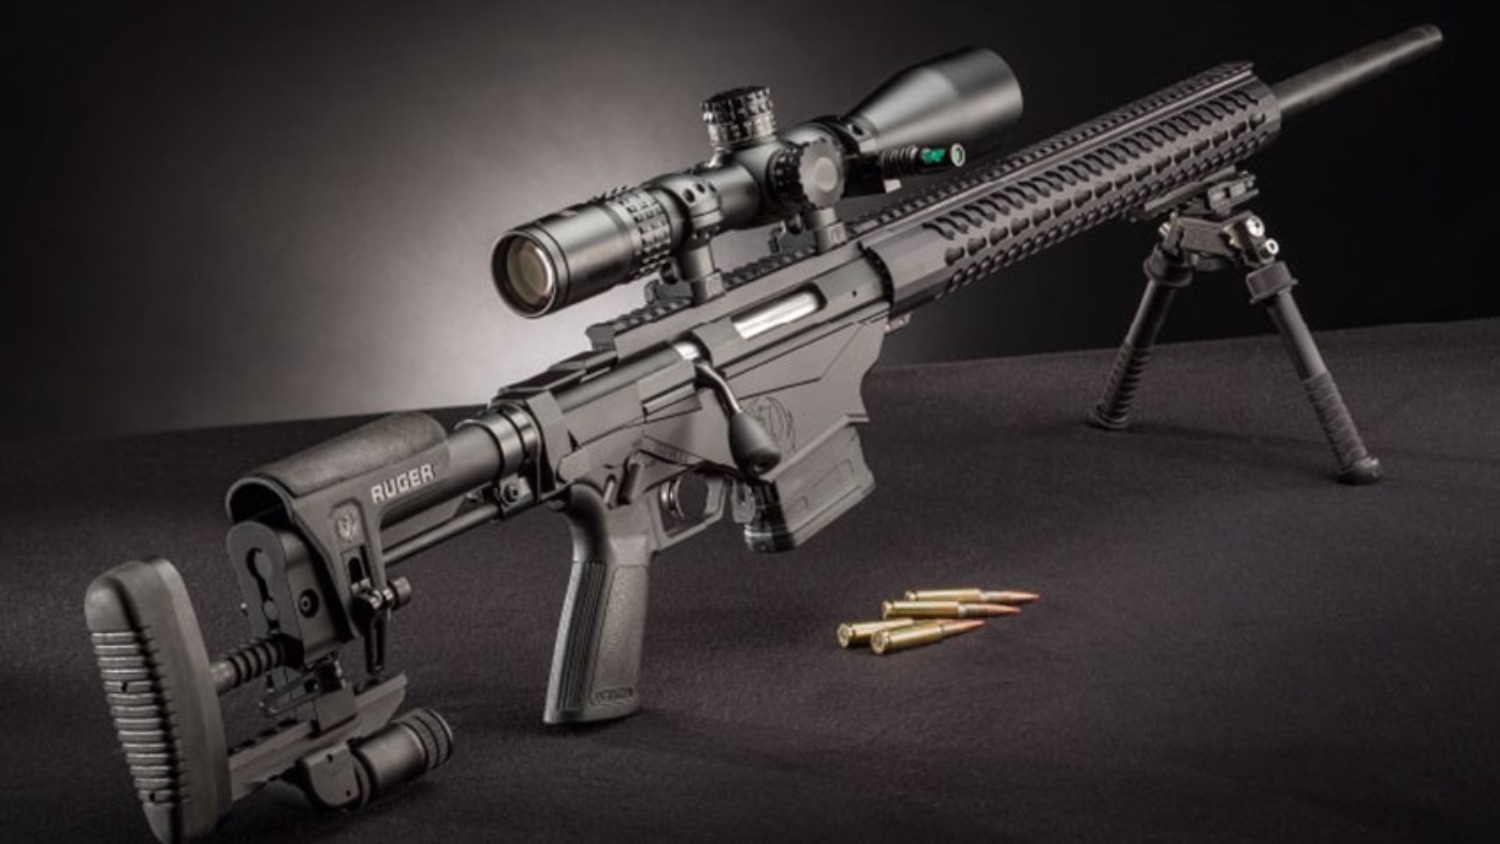 Ruger's Precision Rifle Just How Dangerous (And Cheap)? The National